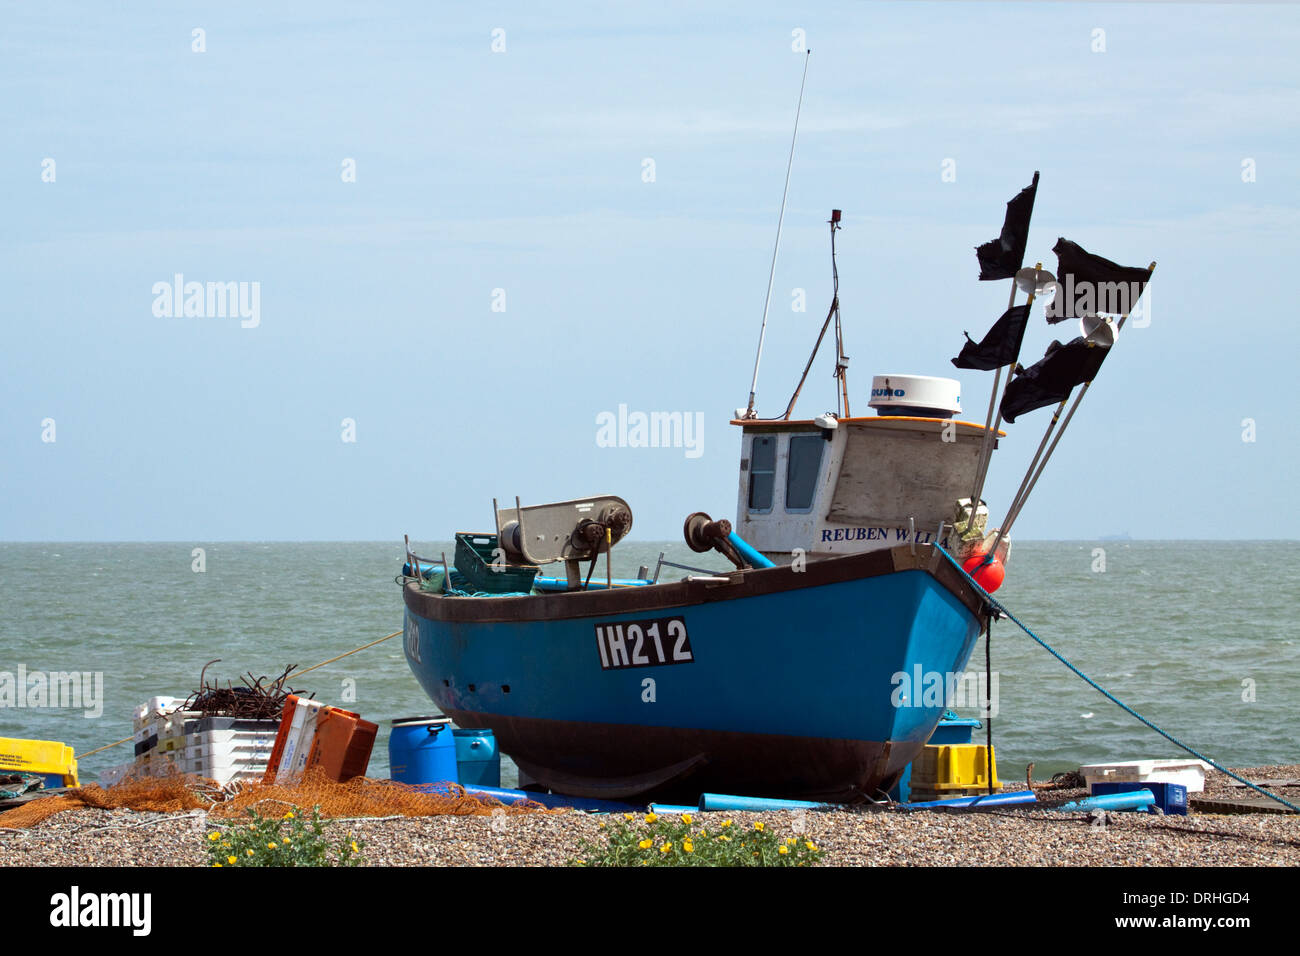 Fishing vessel IH212 on the beach at Aldeburgh, Suffolk with fishing paraphenalia around it Stock Photo